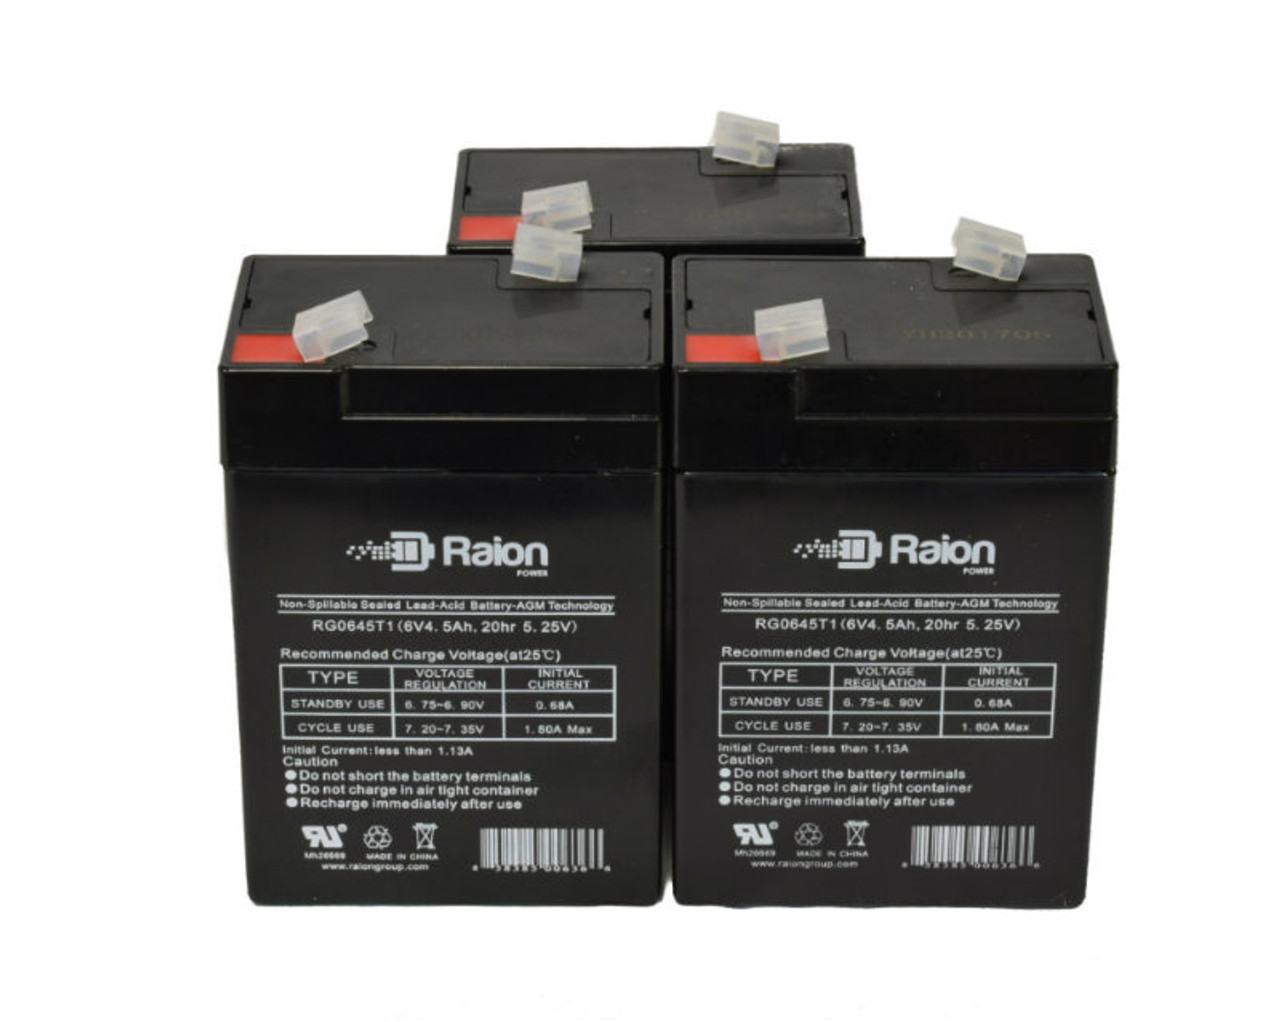 Raion Power 6V 4.5Ah Replacement Emergency Light Battery for Sho-Me 9985 - 3 Pack